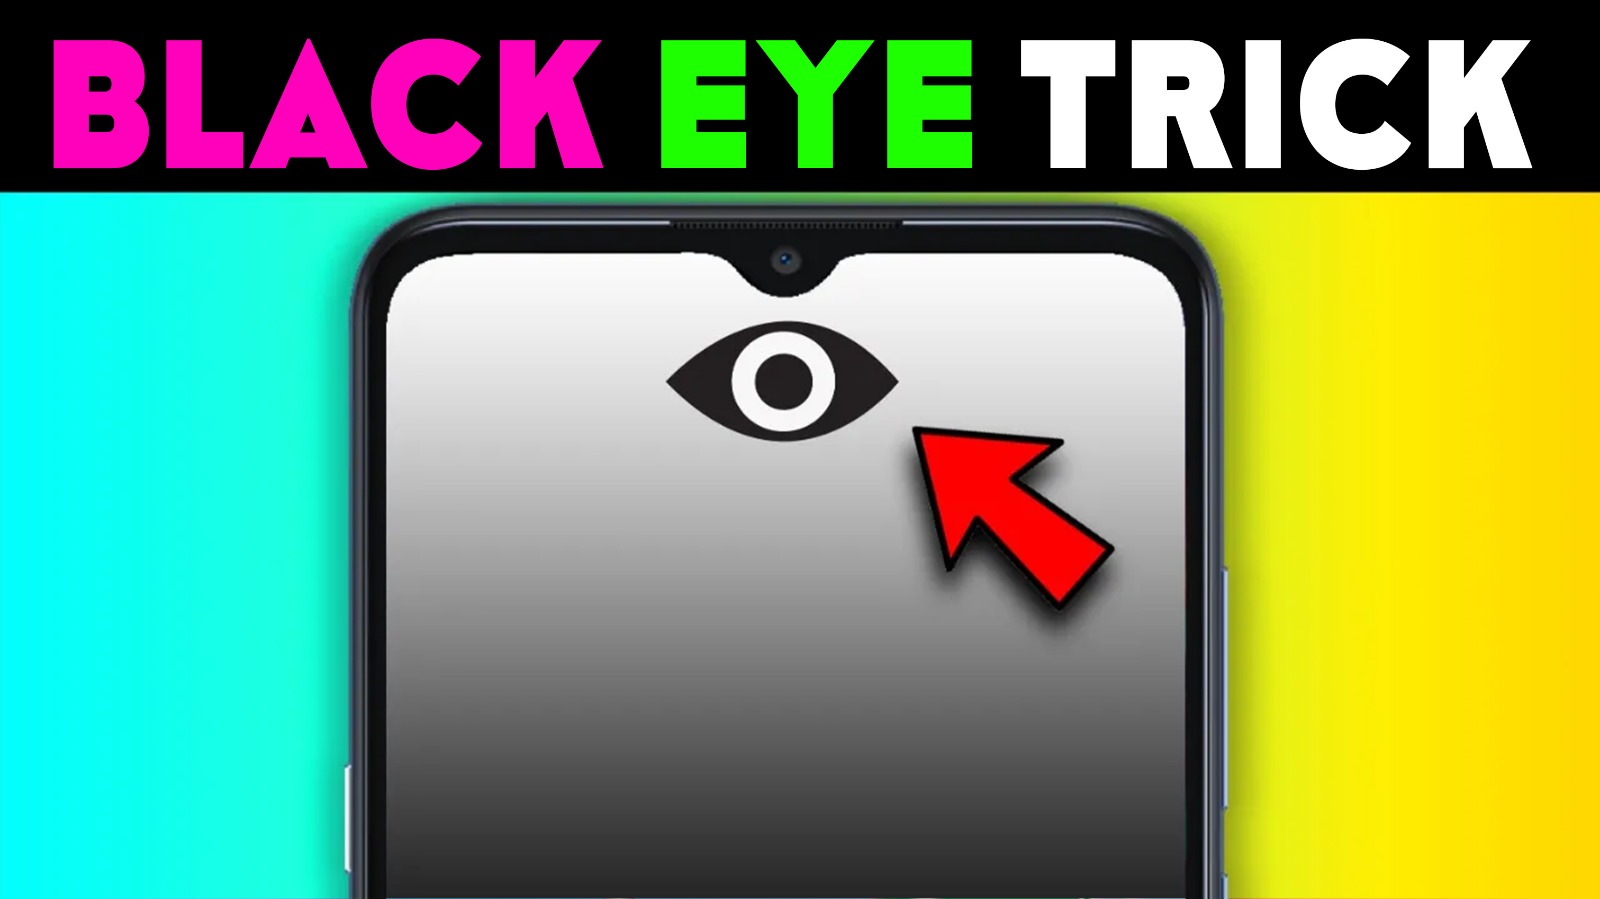 Hide Screen Conceal Your Black Eye and Privacy from Prying Eyes